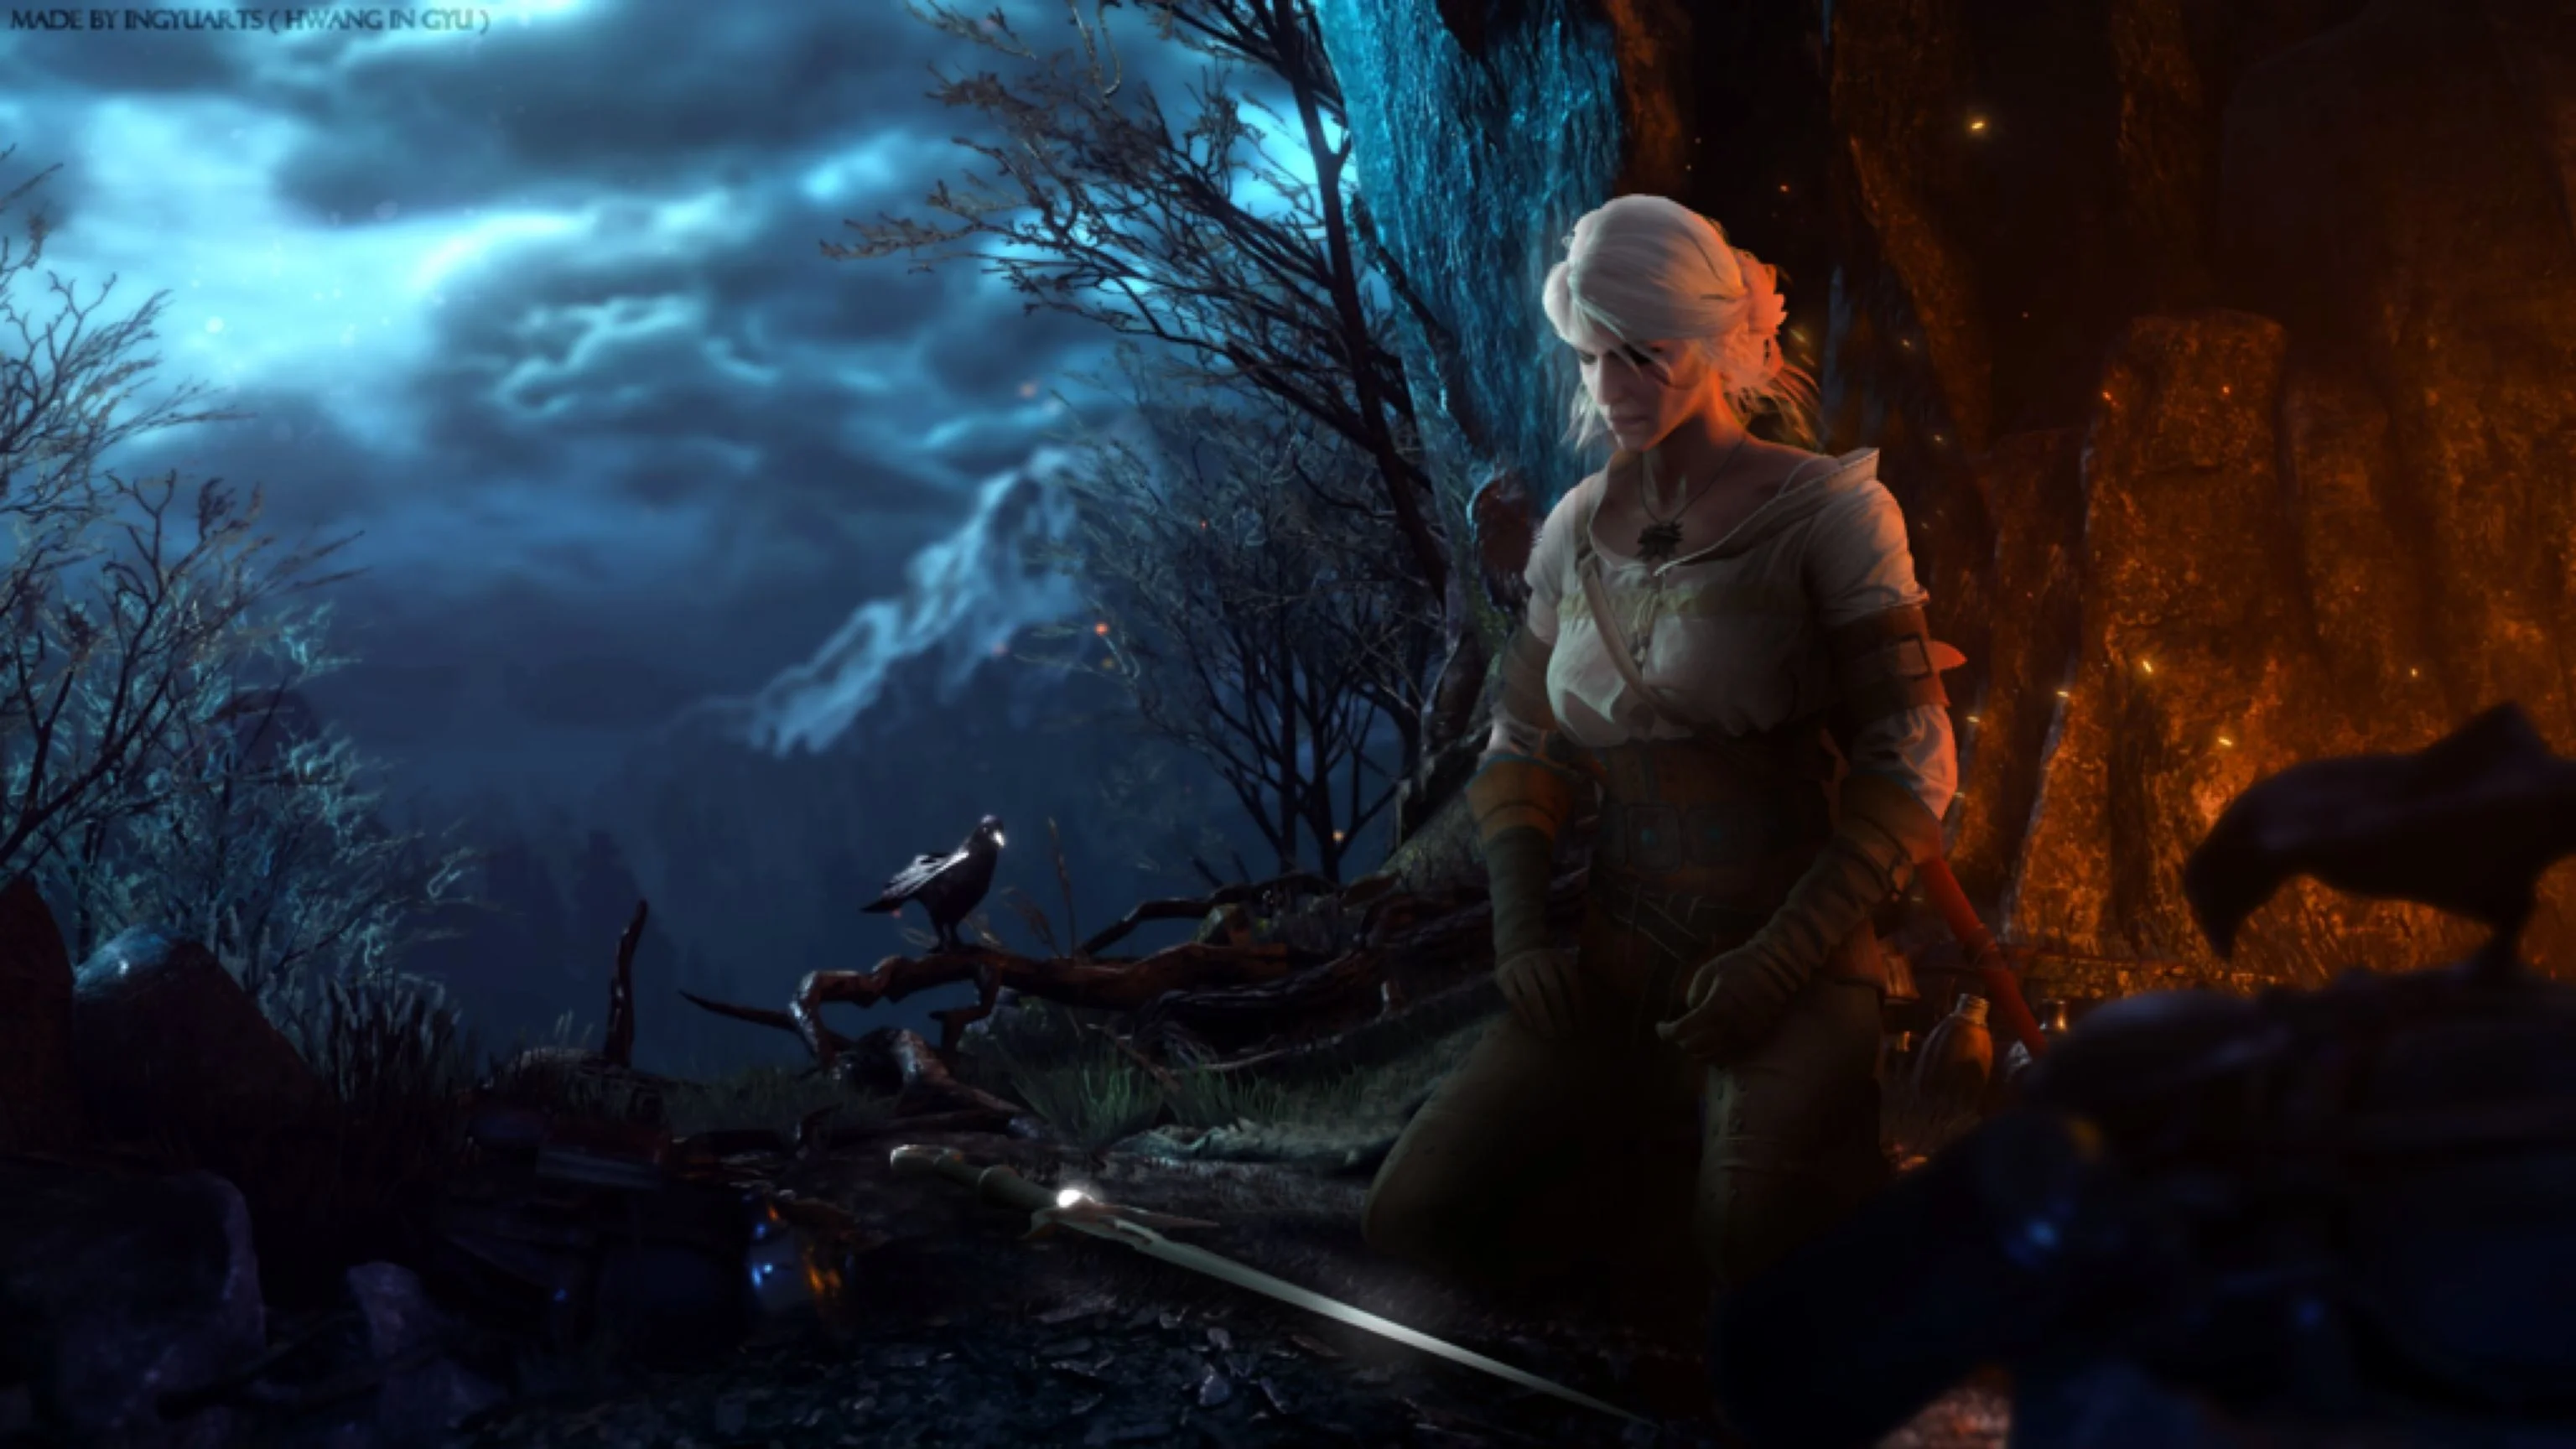 CD Projekt RED announced the release date of the modification editor for the third part of The Witcher